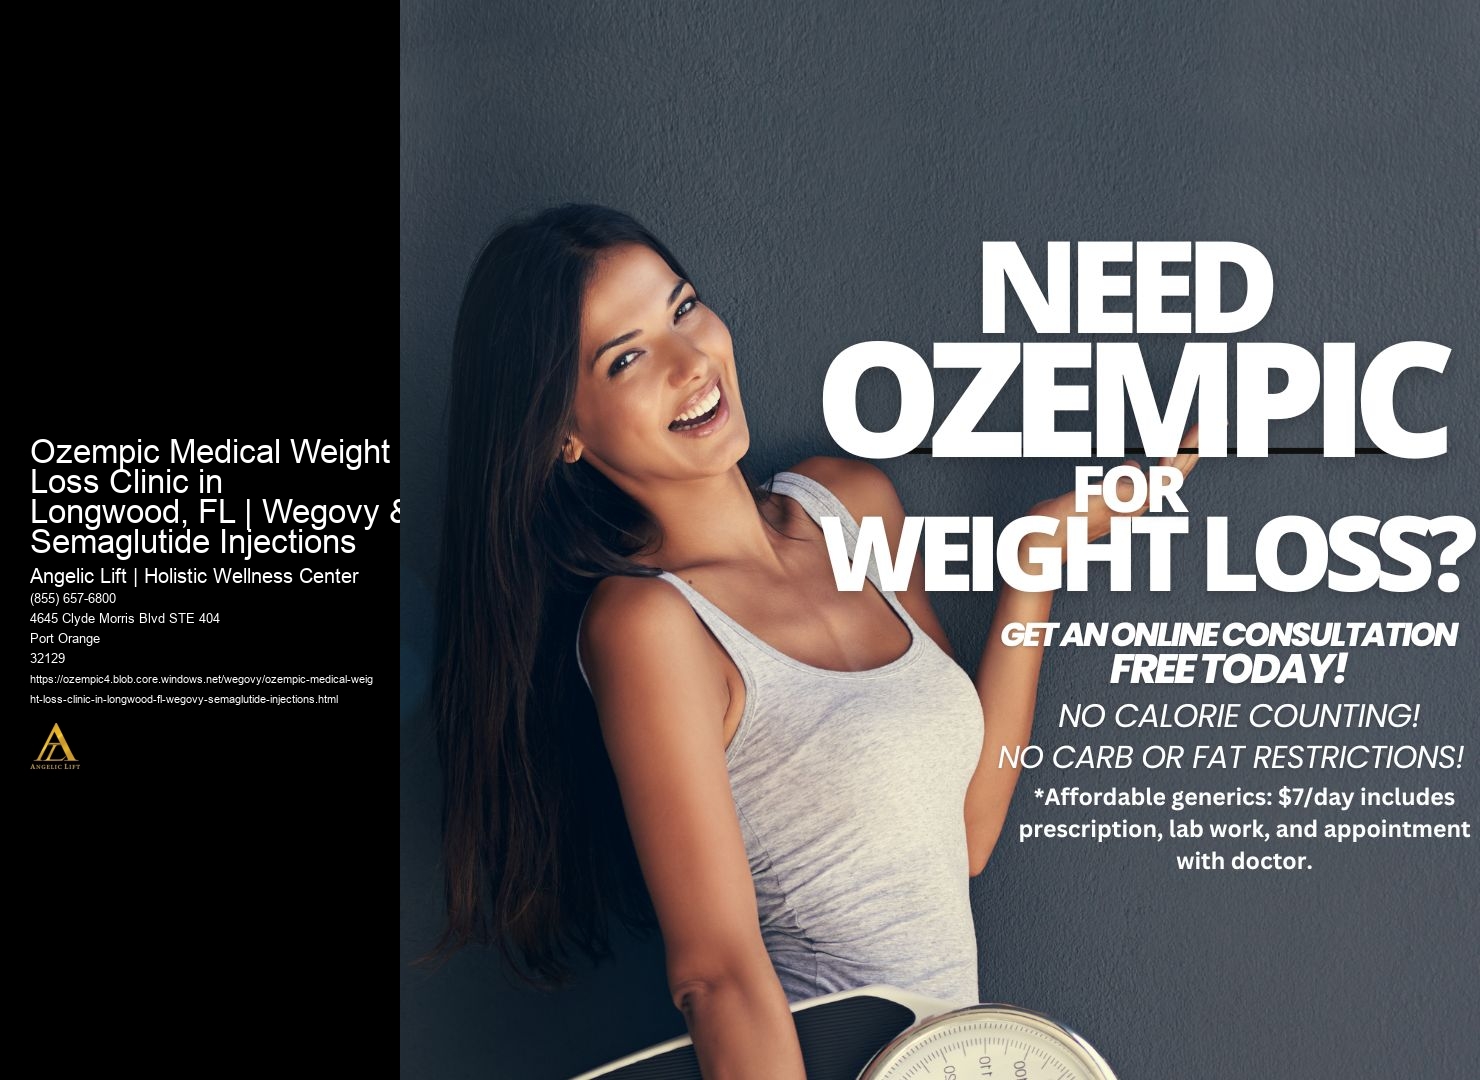 Ozempic Medical Weight Loss Clinic in Longwood, FL | Wegovy & Semaglutide Injections